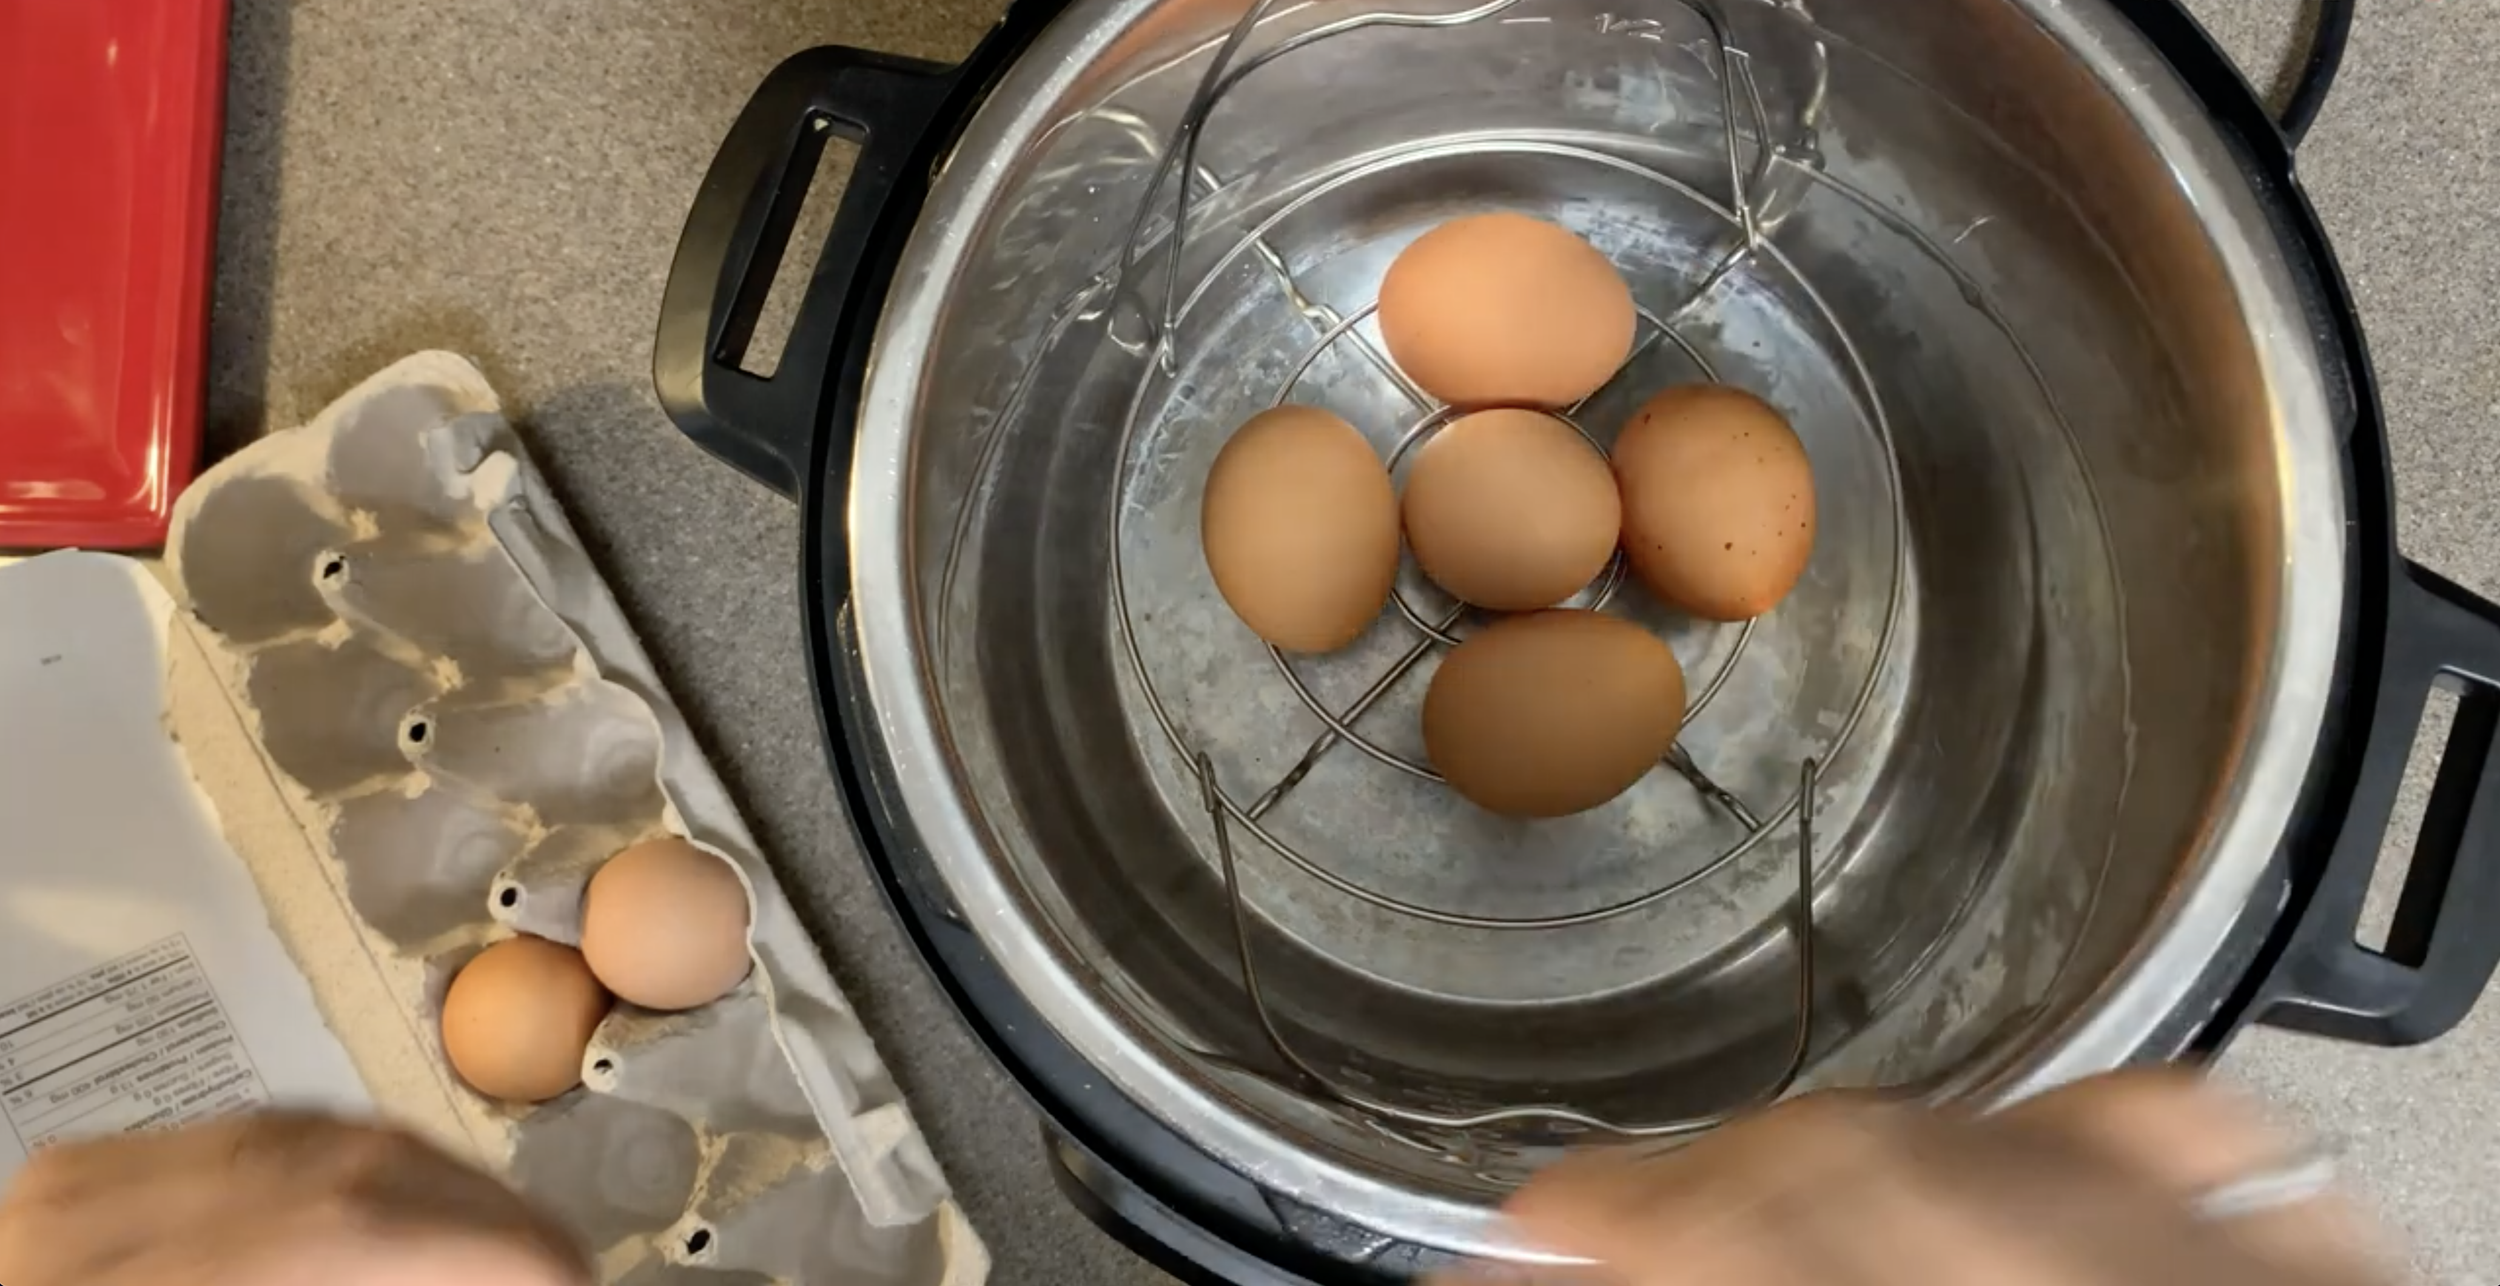 Step by Step Instant Pot Boiled Eggs Guide  Perfect Timing for the Best Boiled  Eggs! — Cooking with Anadi